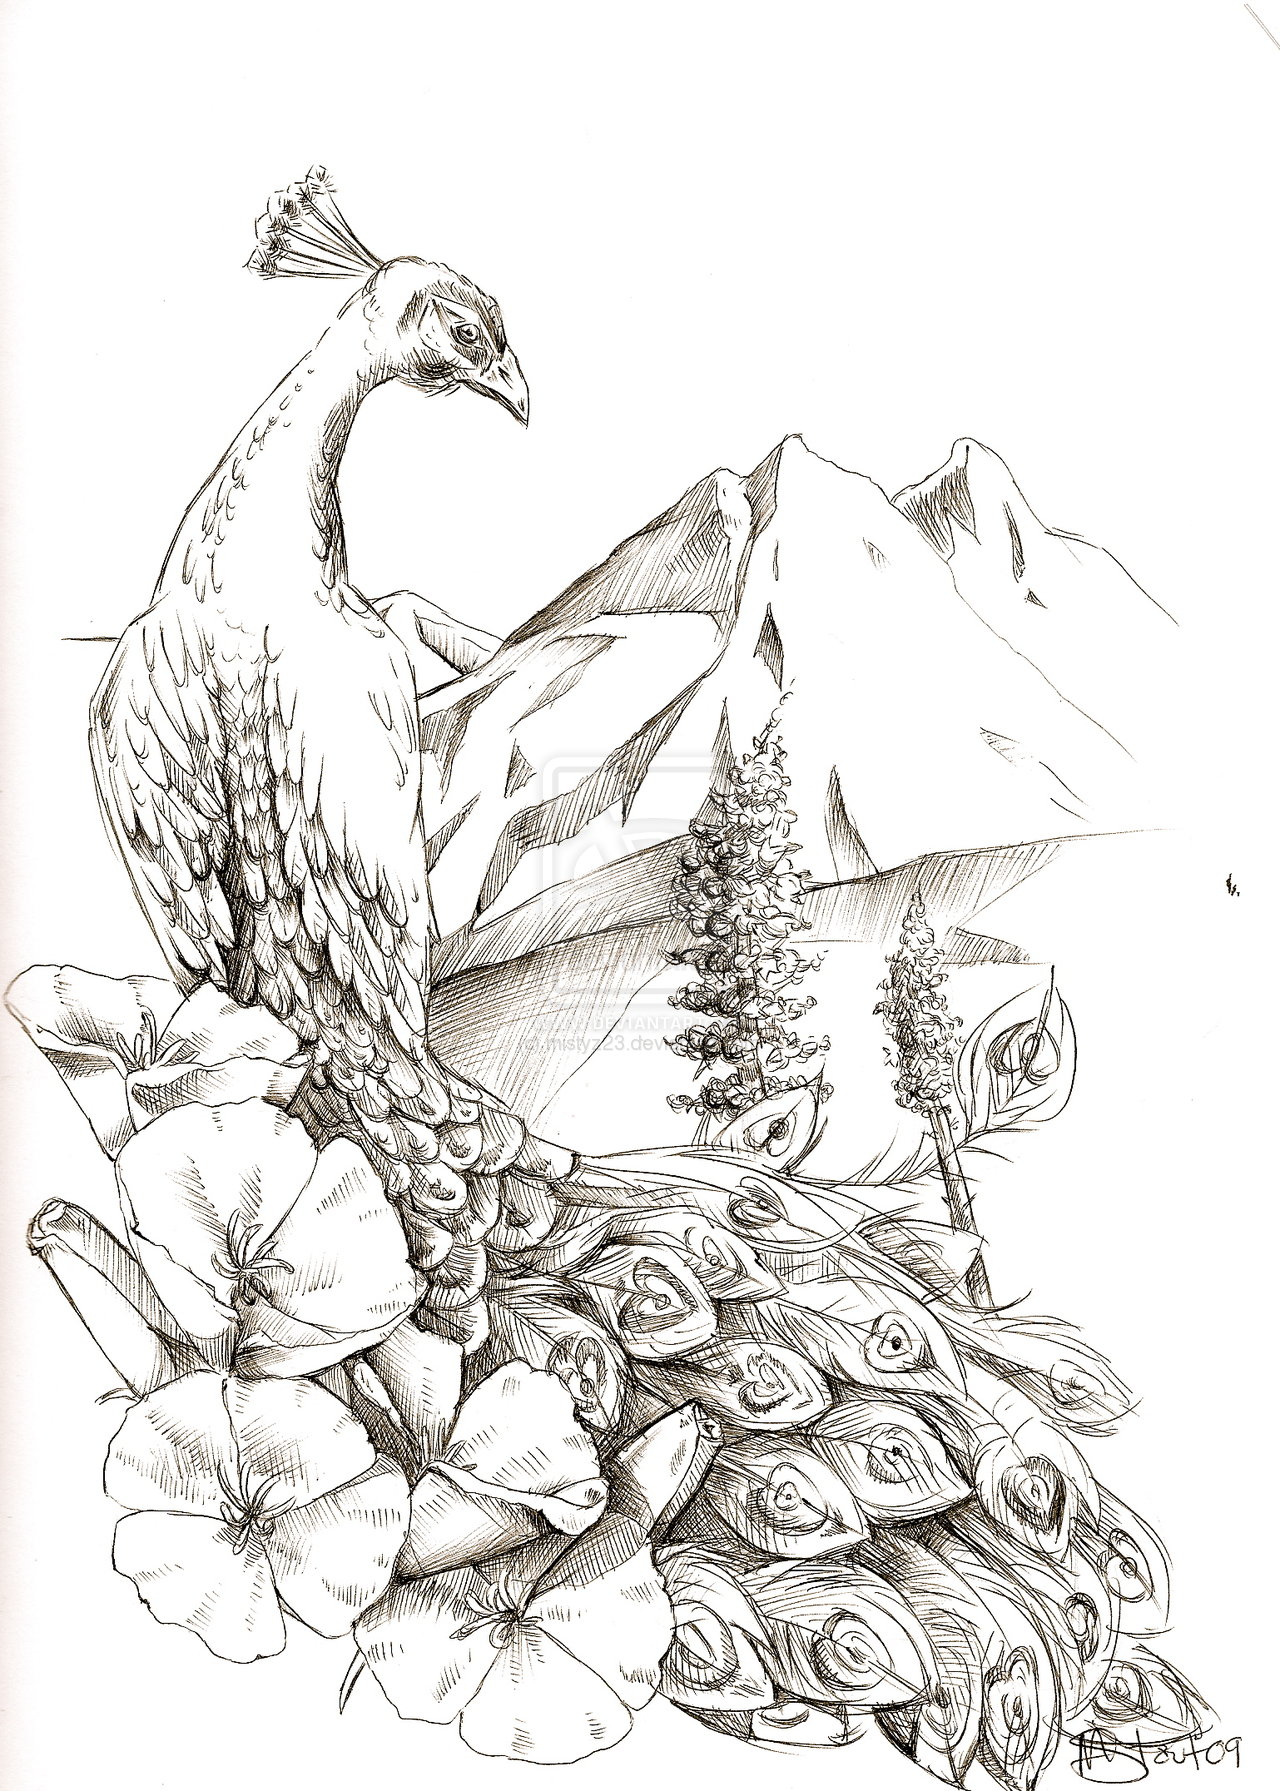 Good peacock with flowers on mountain background tattoo design